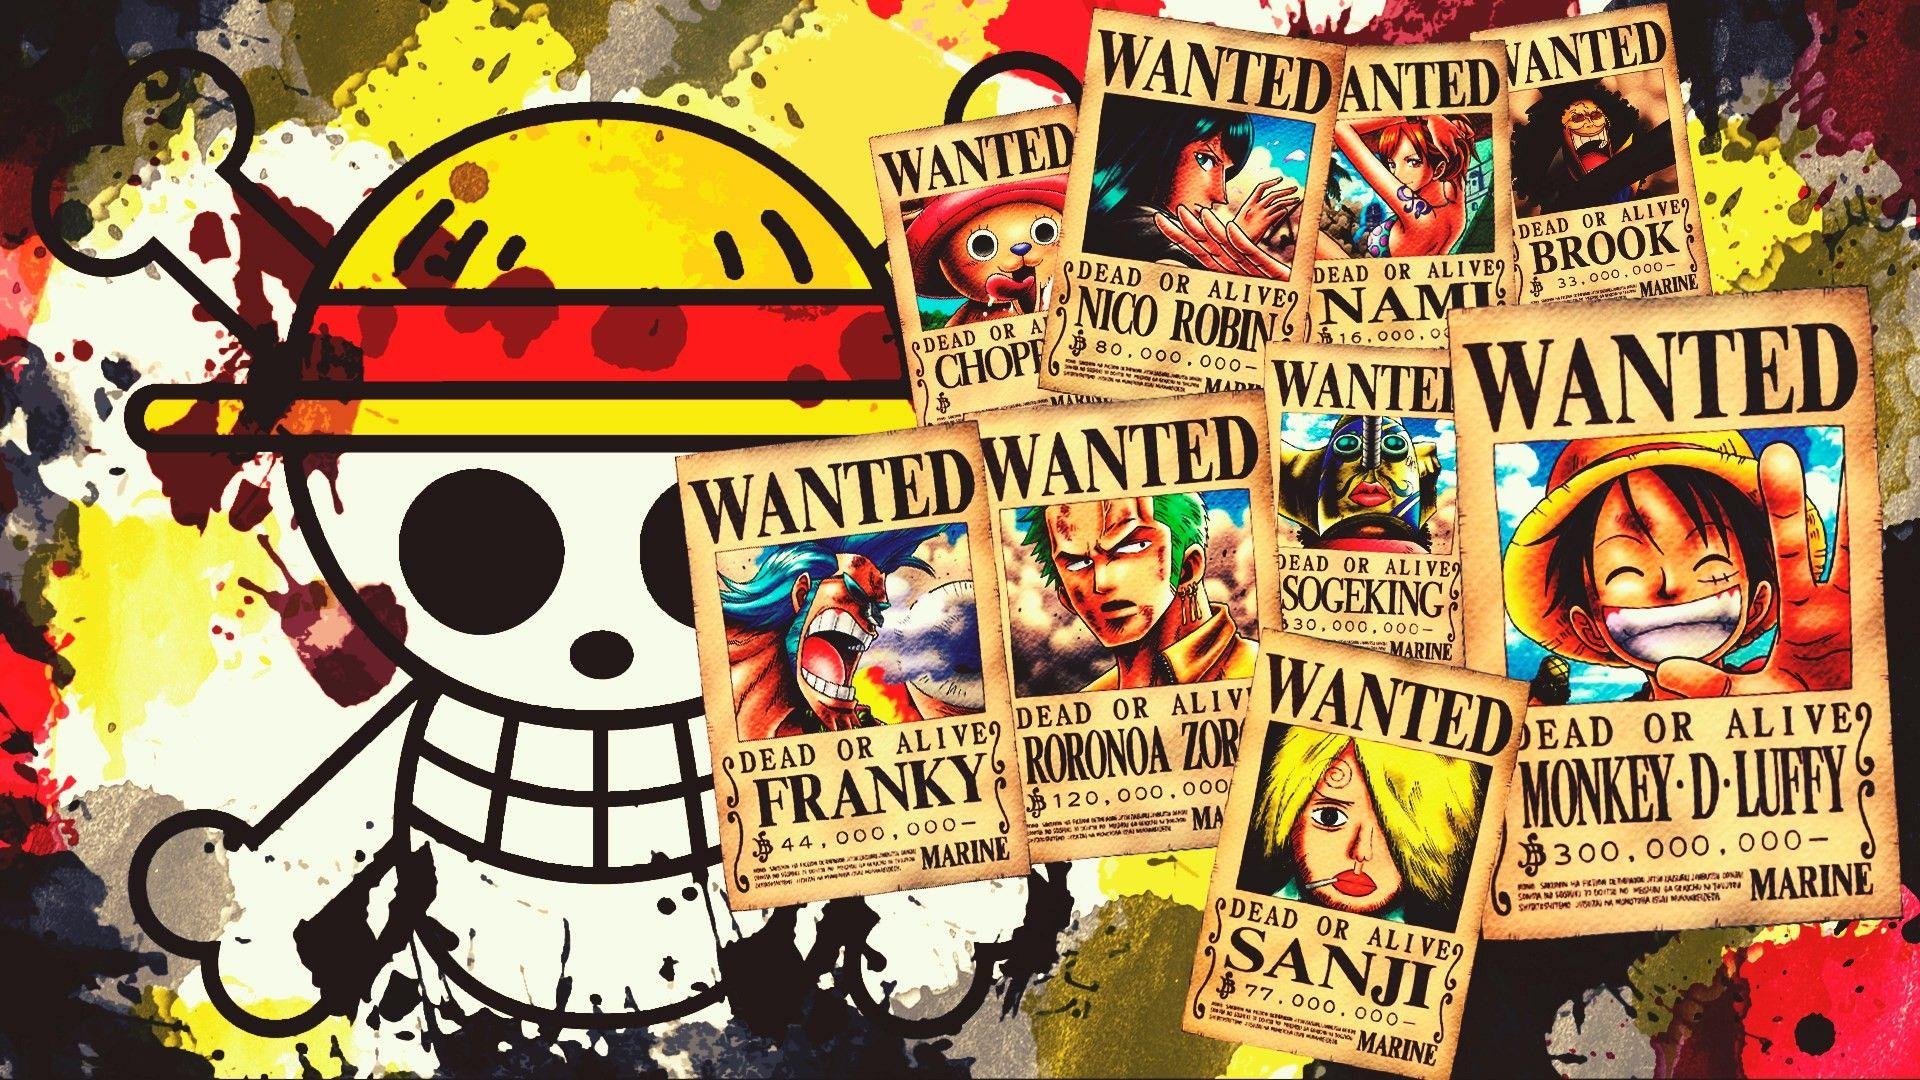 38+ One Piece Wallpaper Hd Laptop Images